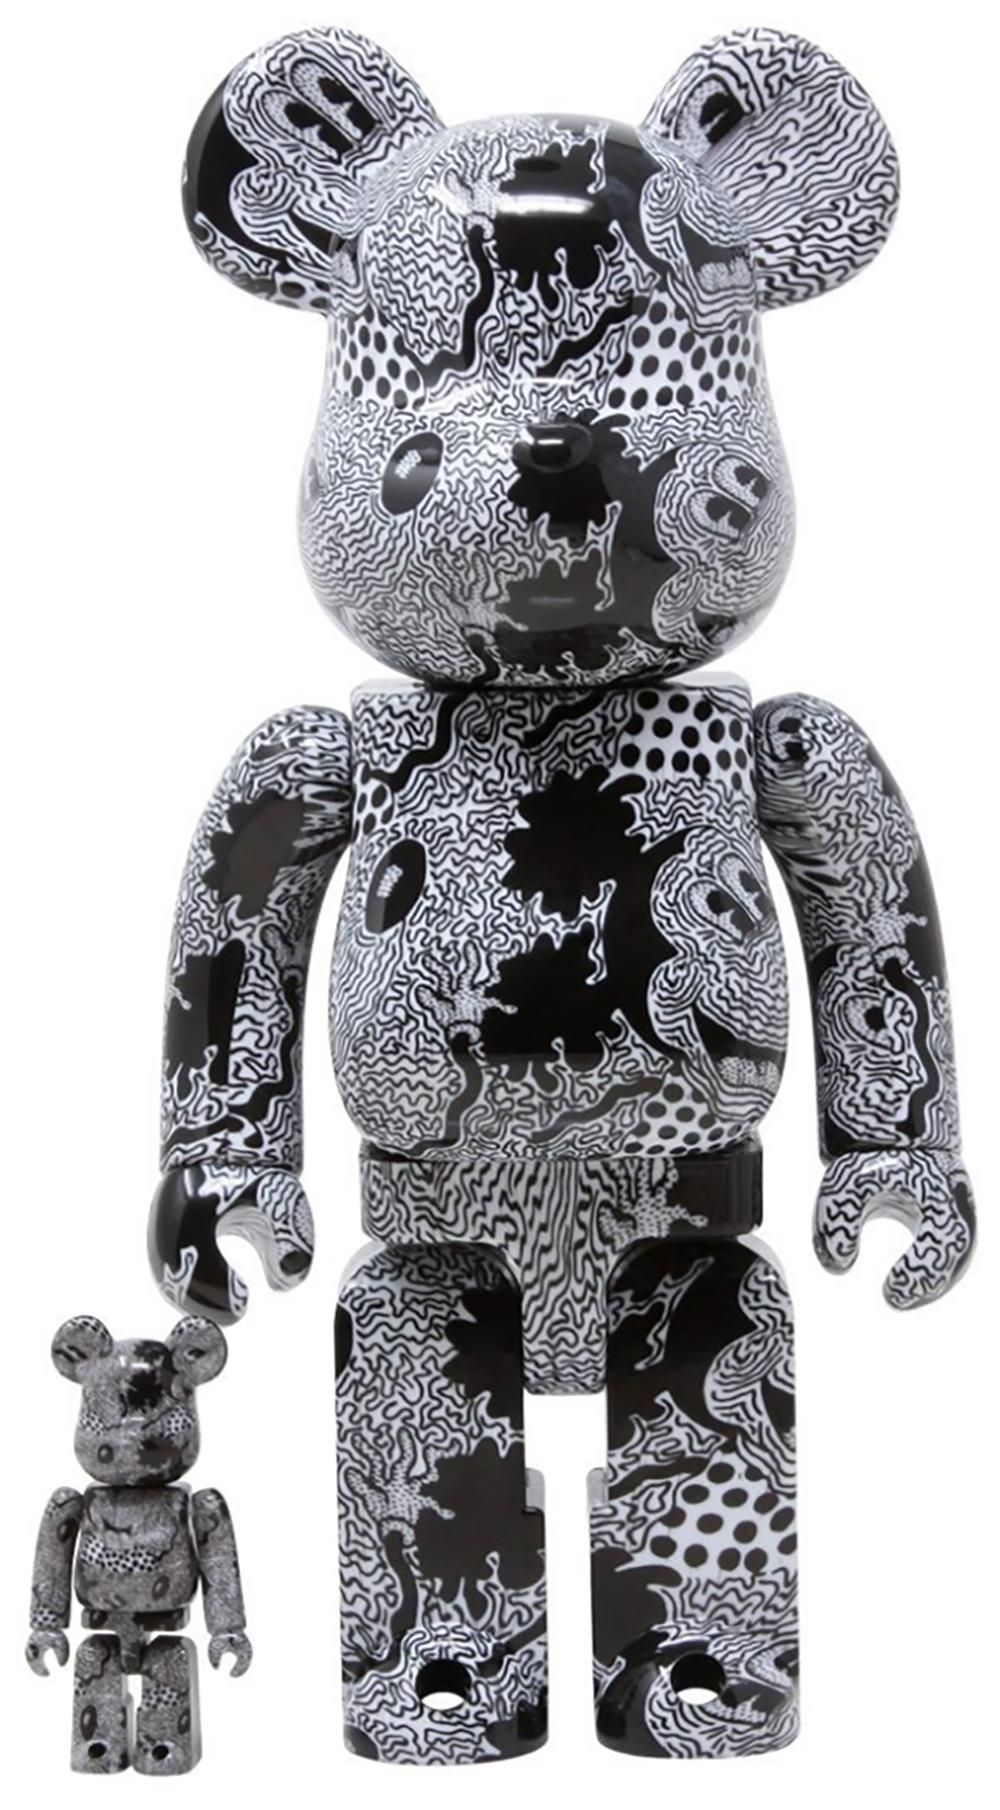 Keith Haring Bearbrick 400% companion (Haring Mickey Mouse BE@RBRICK) - Print by (after) Keith Haring